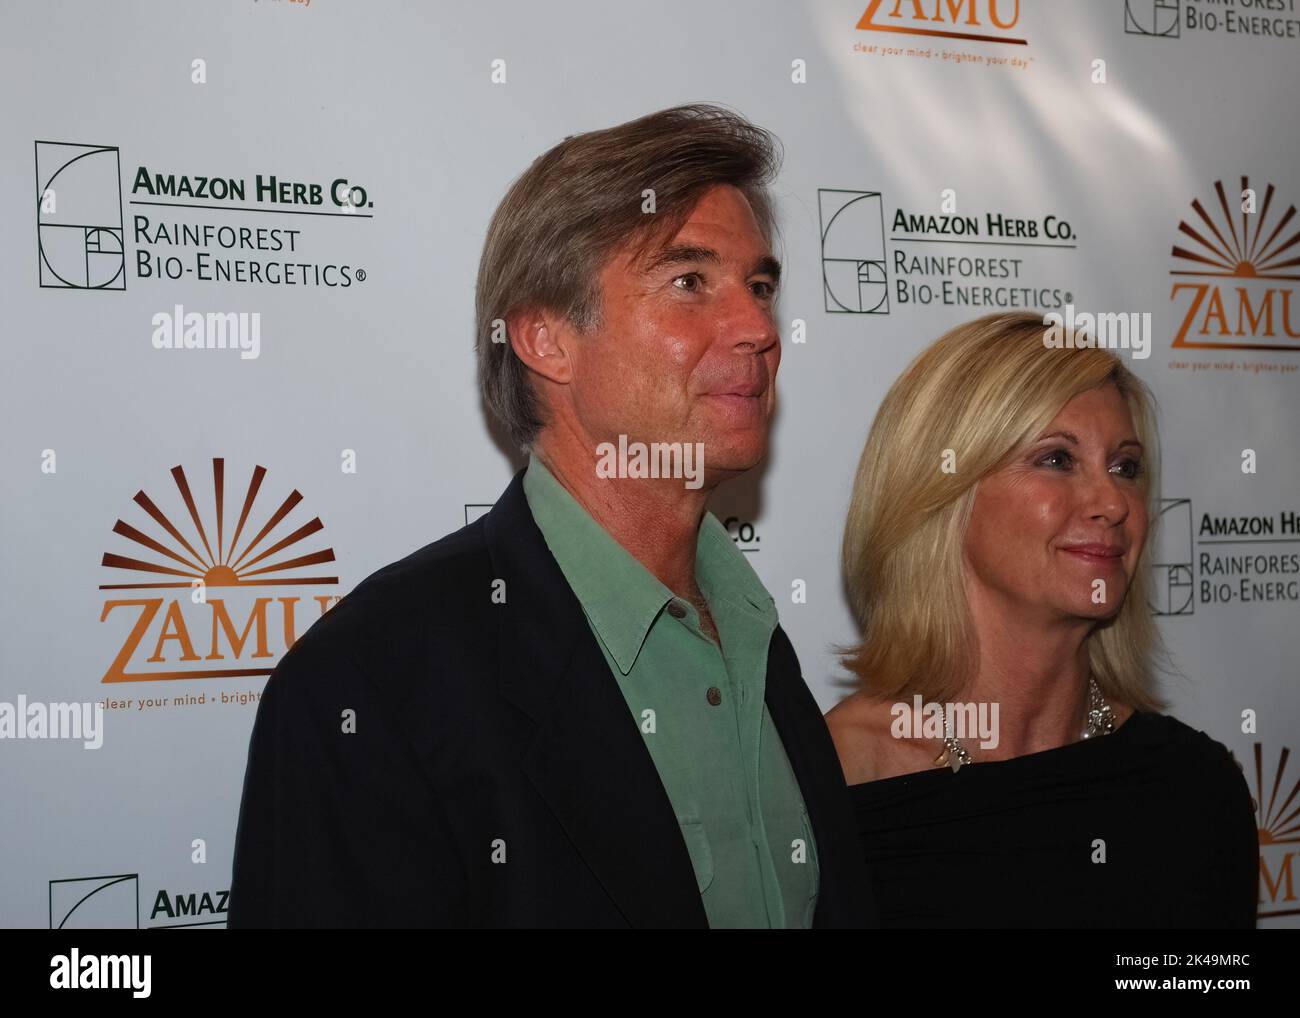 Cologne, Germany - October 6, 2009: Olivia Newton-John and her husband John Easterling visit a Amazon Herb showcase for the Zamu health drink in Colog Stock Photo